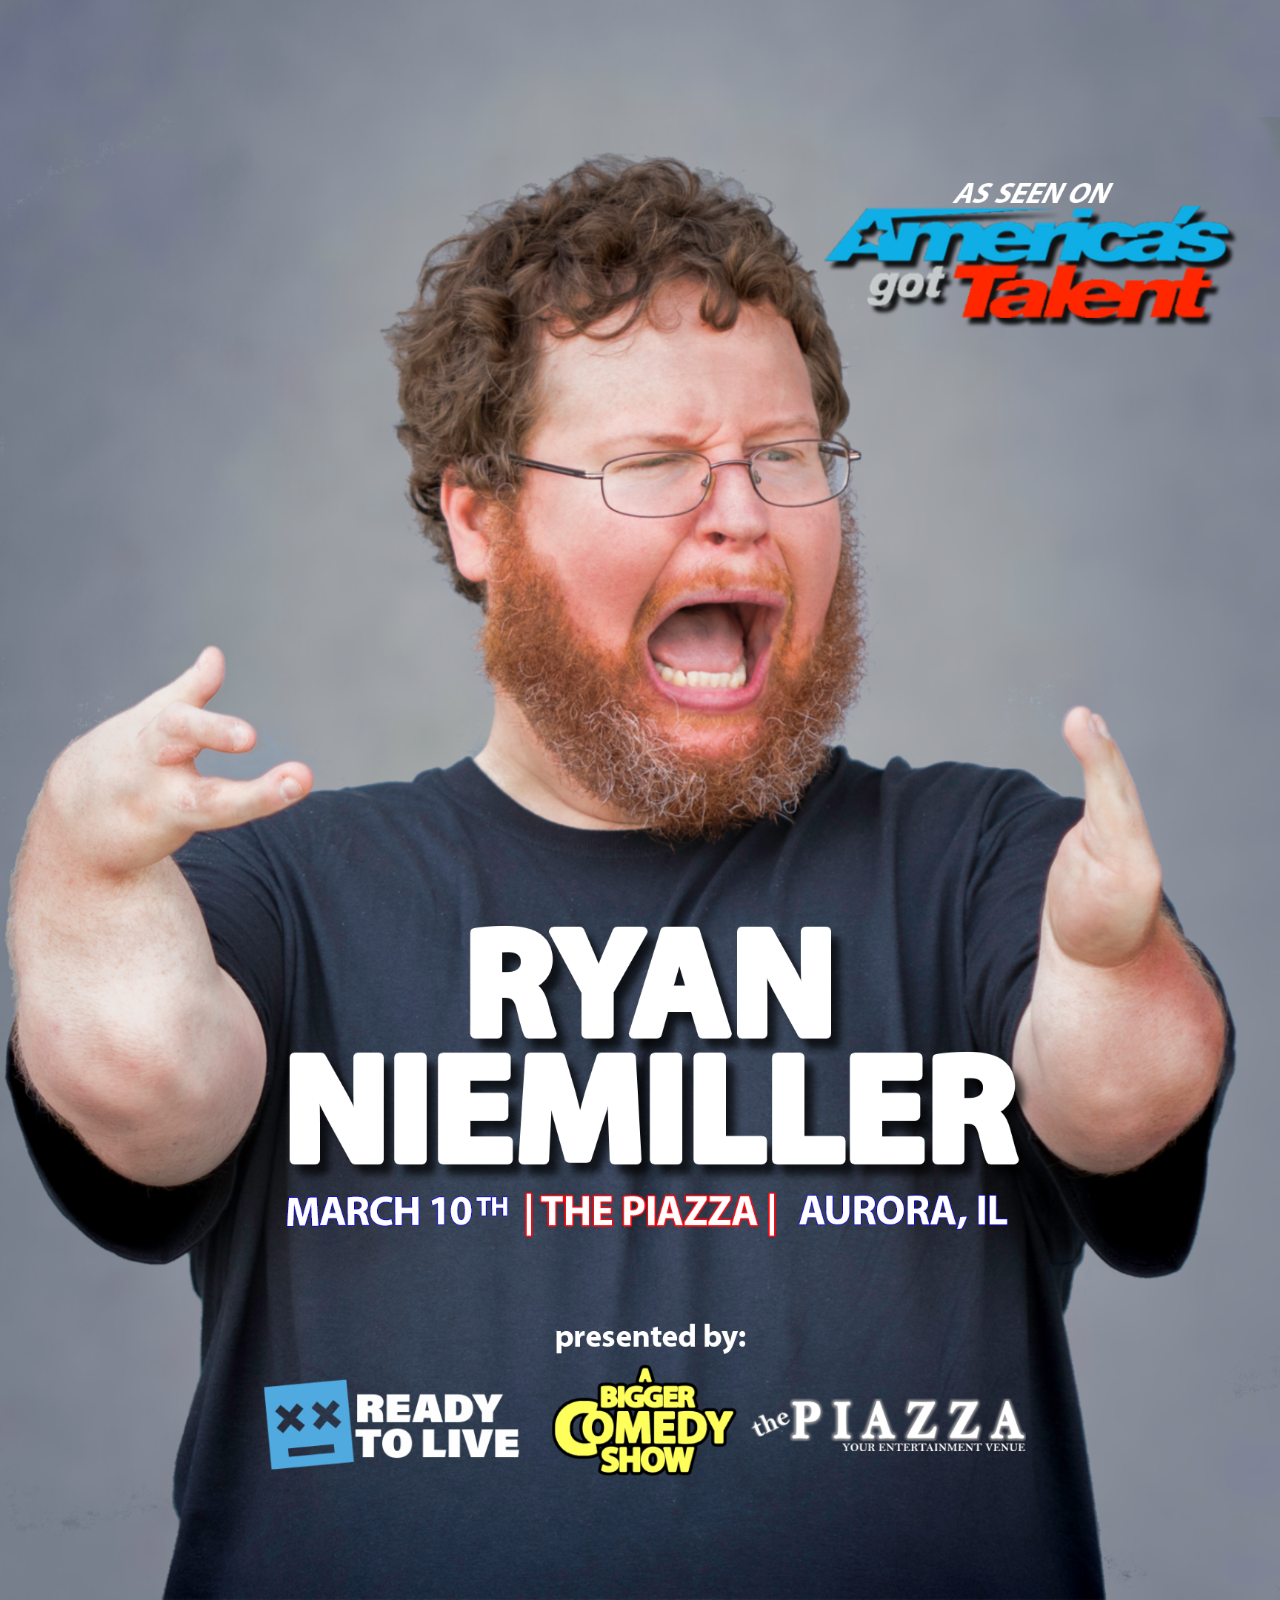 Ryan Niemiller March 10th at The Piazza!